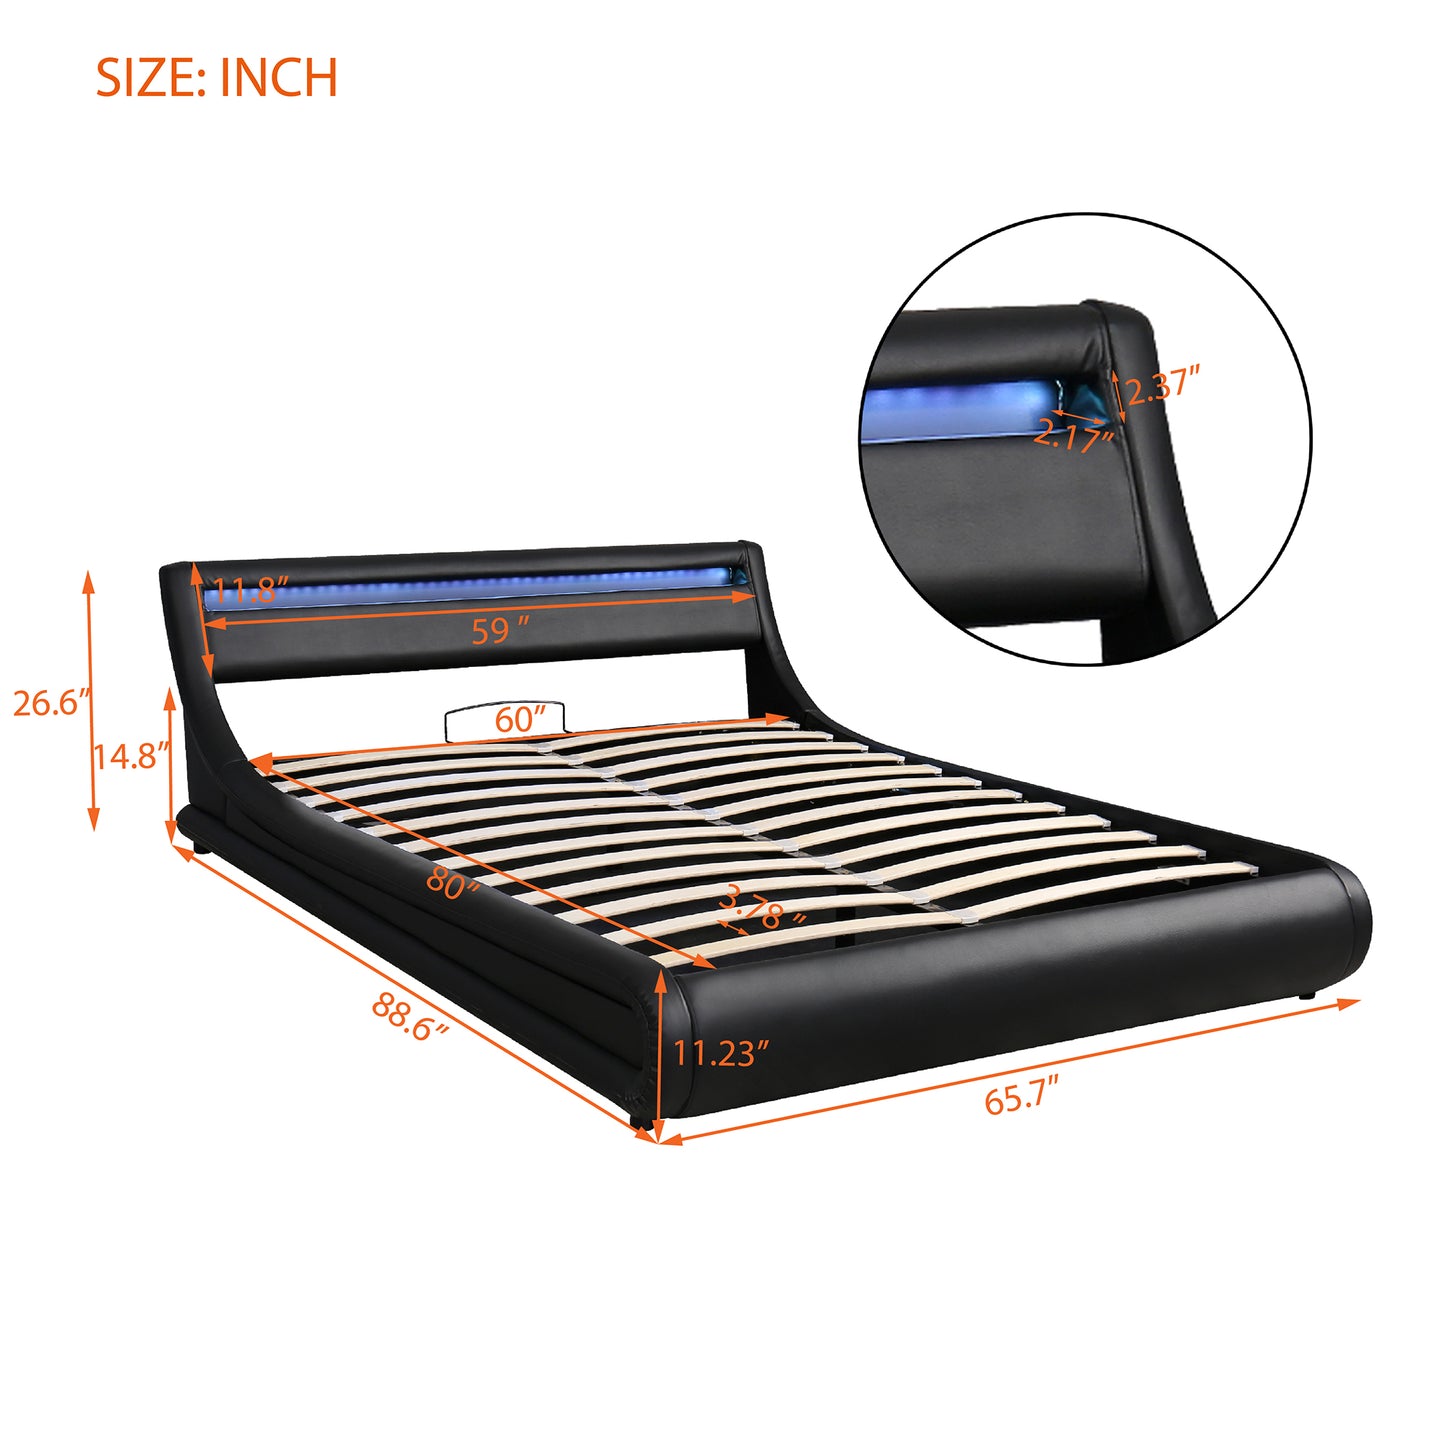 Platform bed with a Hydraulic Storage System with LED Light